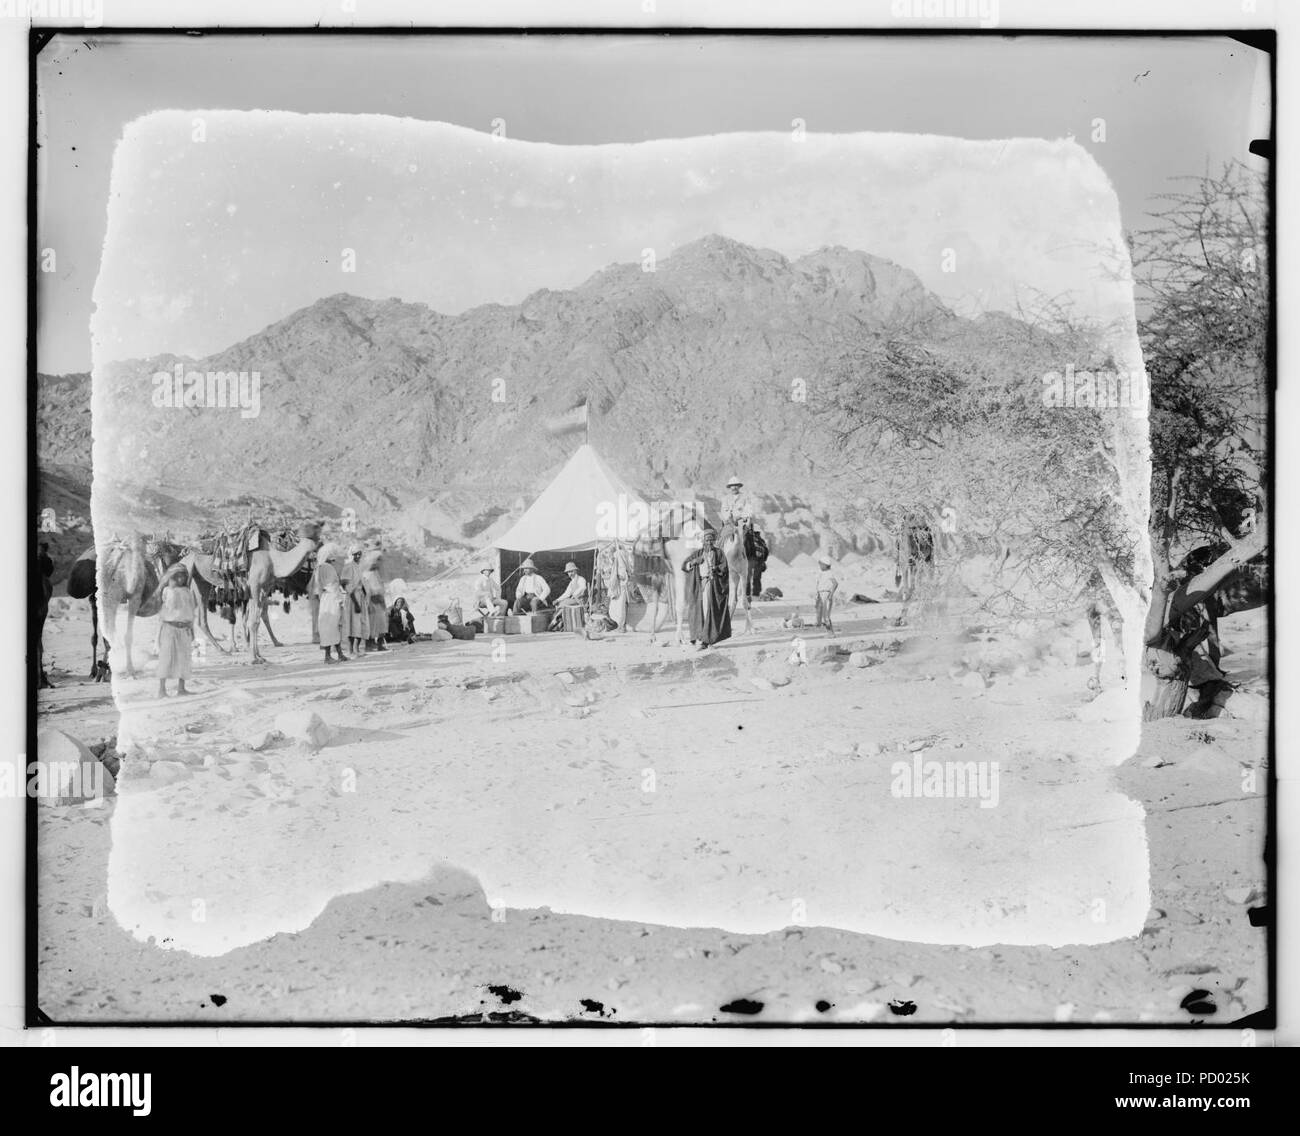 American Colony Photo Dept. expedition camp in the Sinai; Lewis Larsson seated at left in front of tent with others Stock Photo